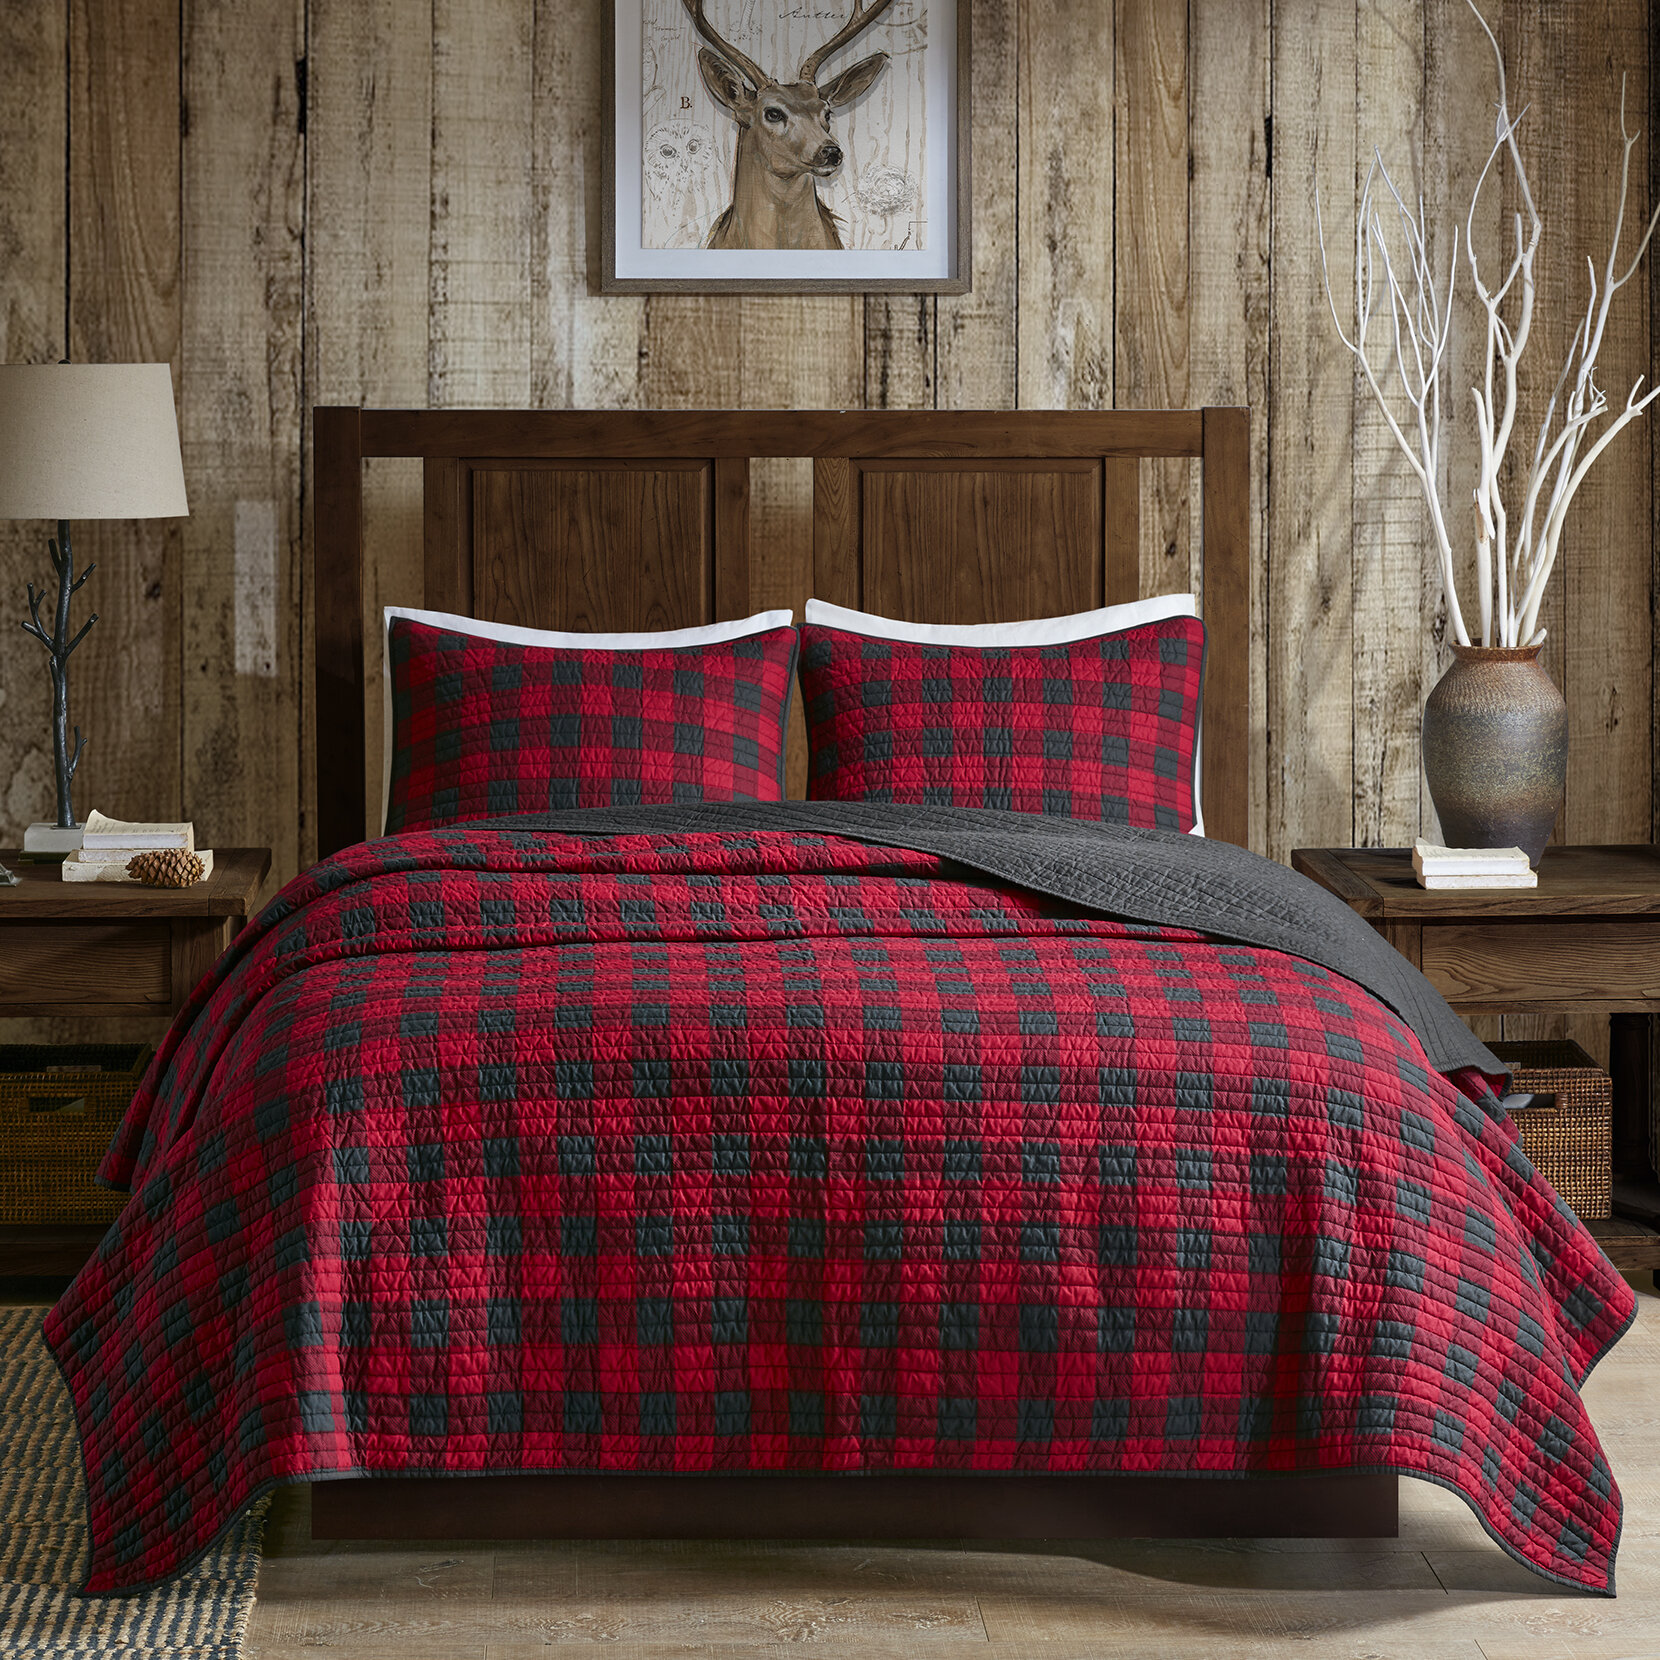 Country Farmhouse Rustic Red Plaid Buffalo Check CAL KING Comforter Set 7 Piece 